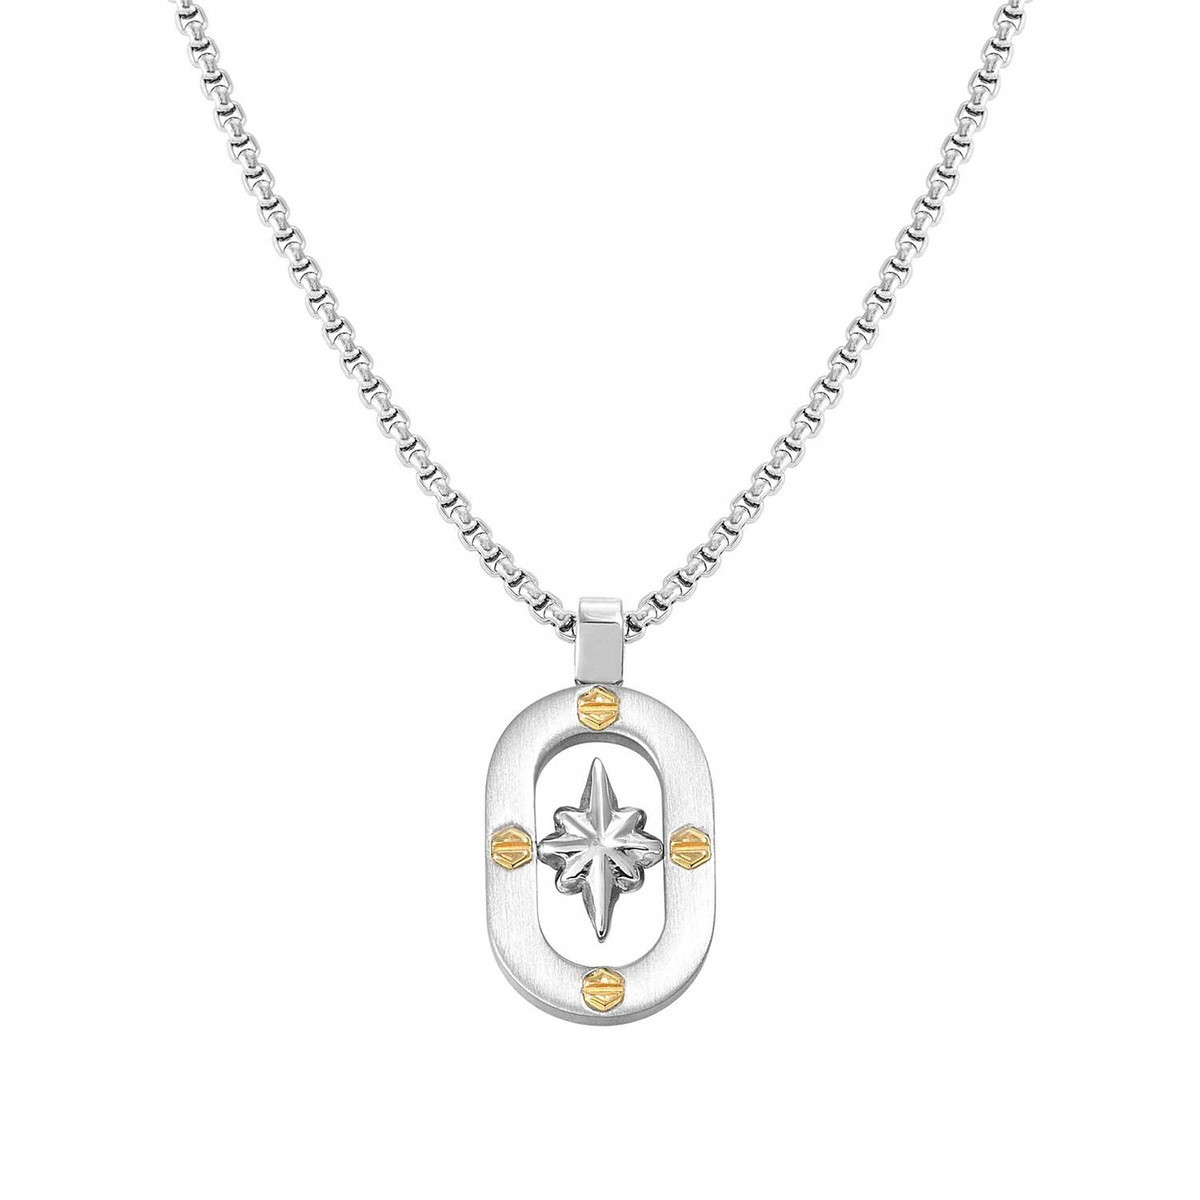 MANVISION COMPASS ROSE NECKLACE IN STAINLESS STEEL